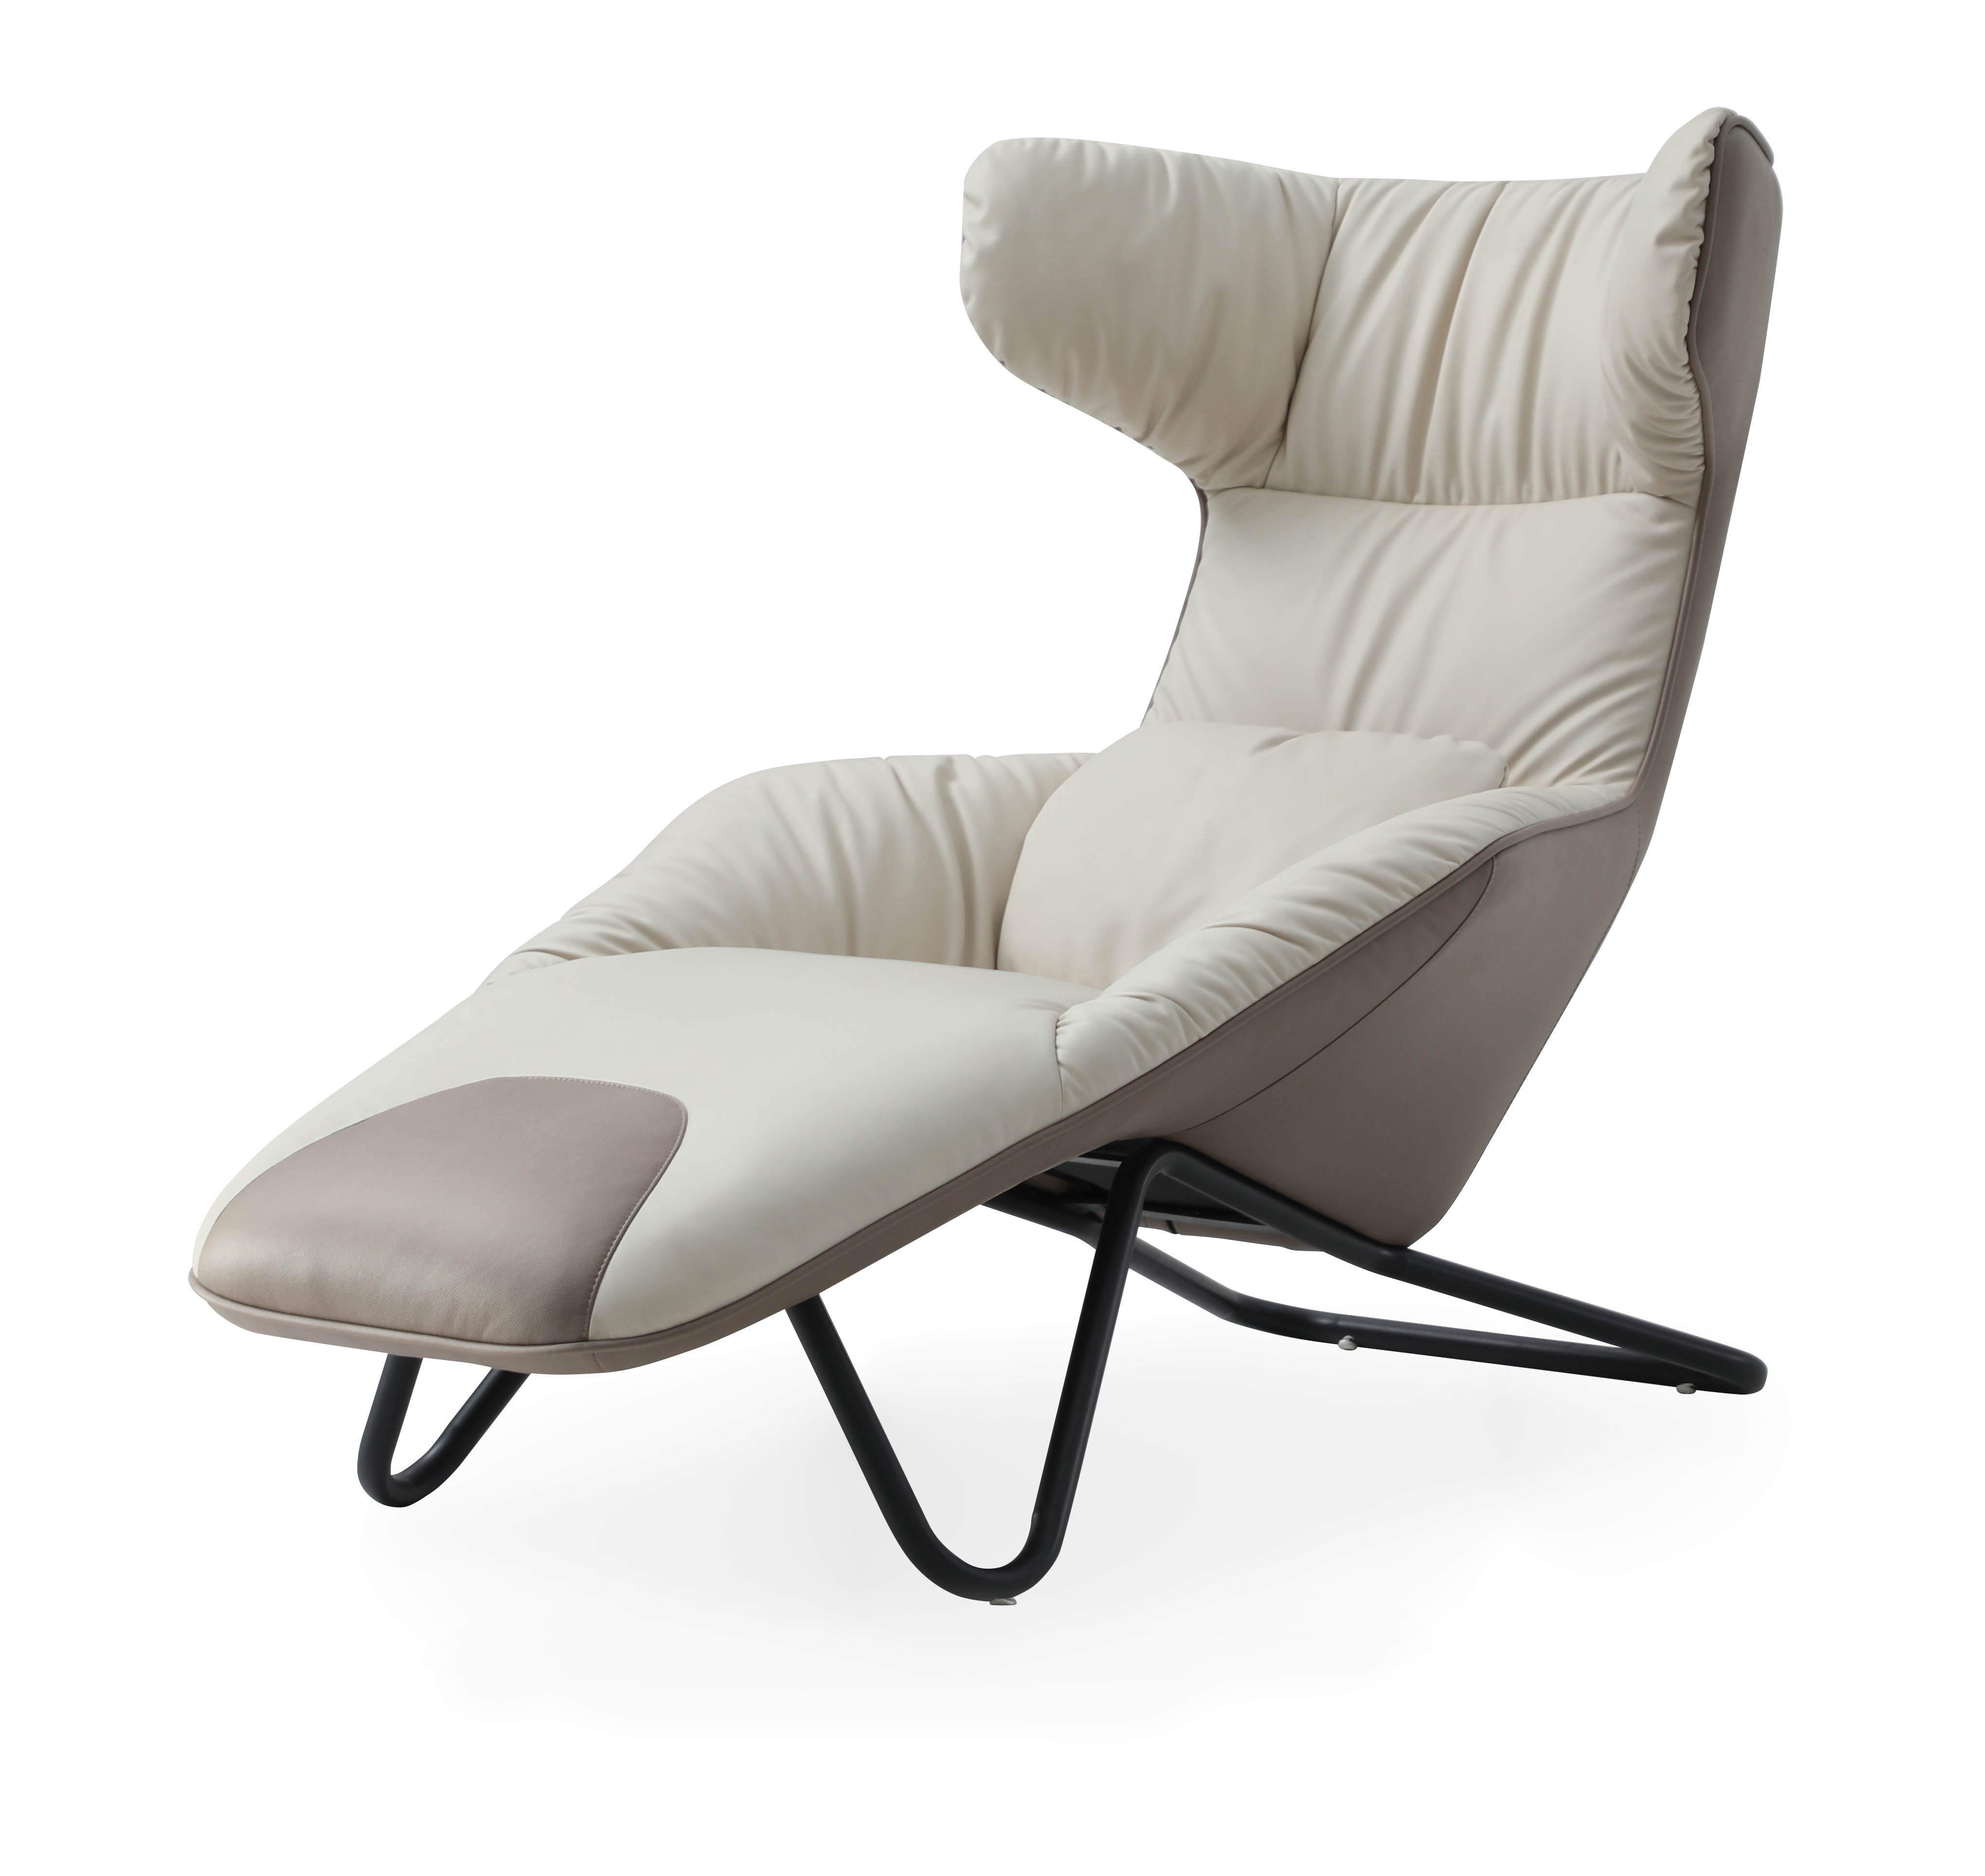 CHAISE LOUNGE / RX90093